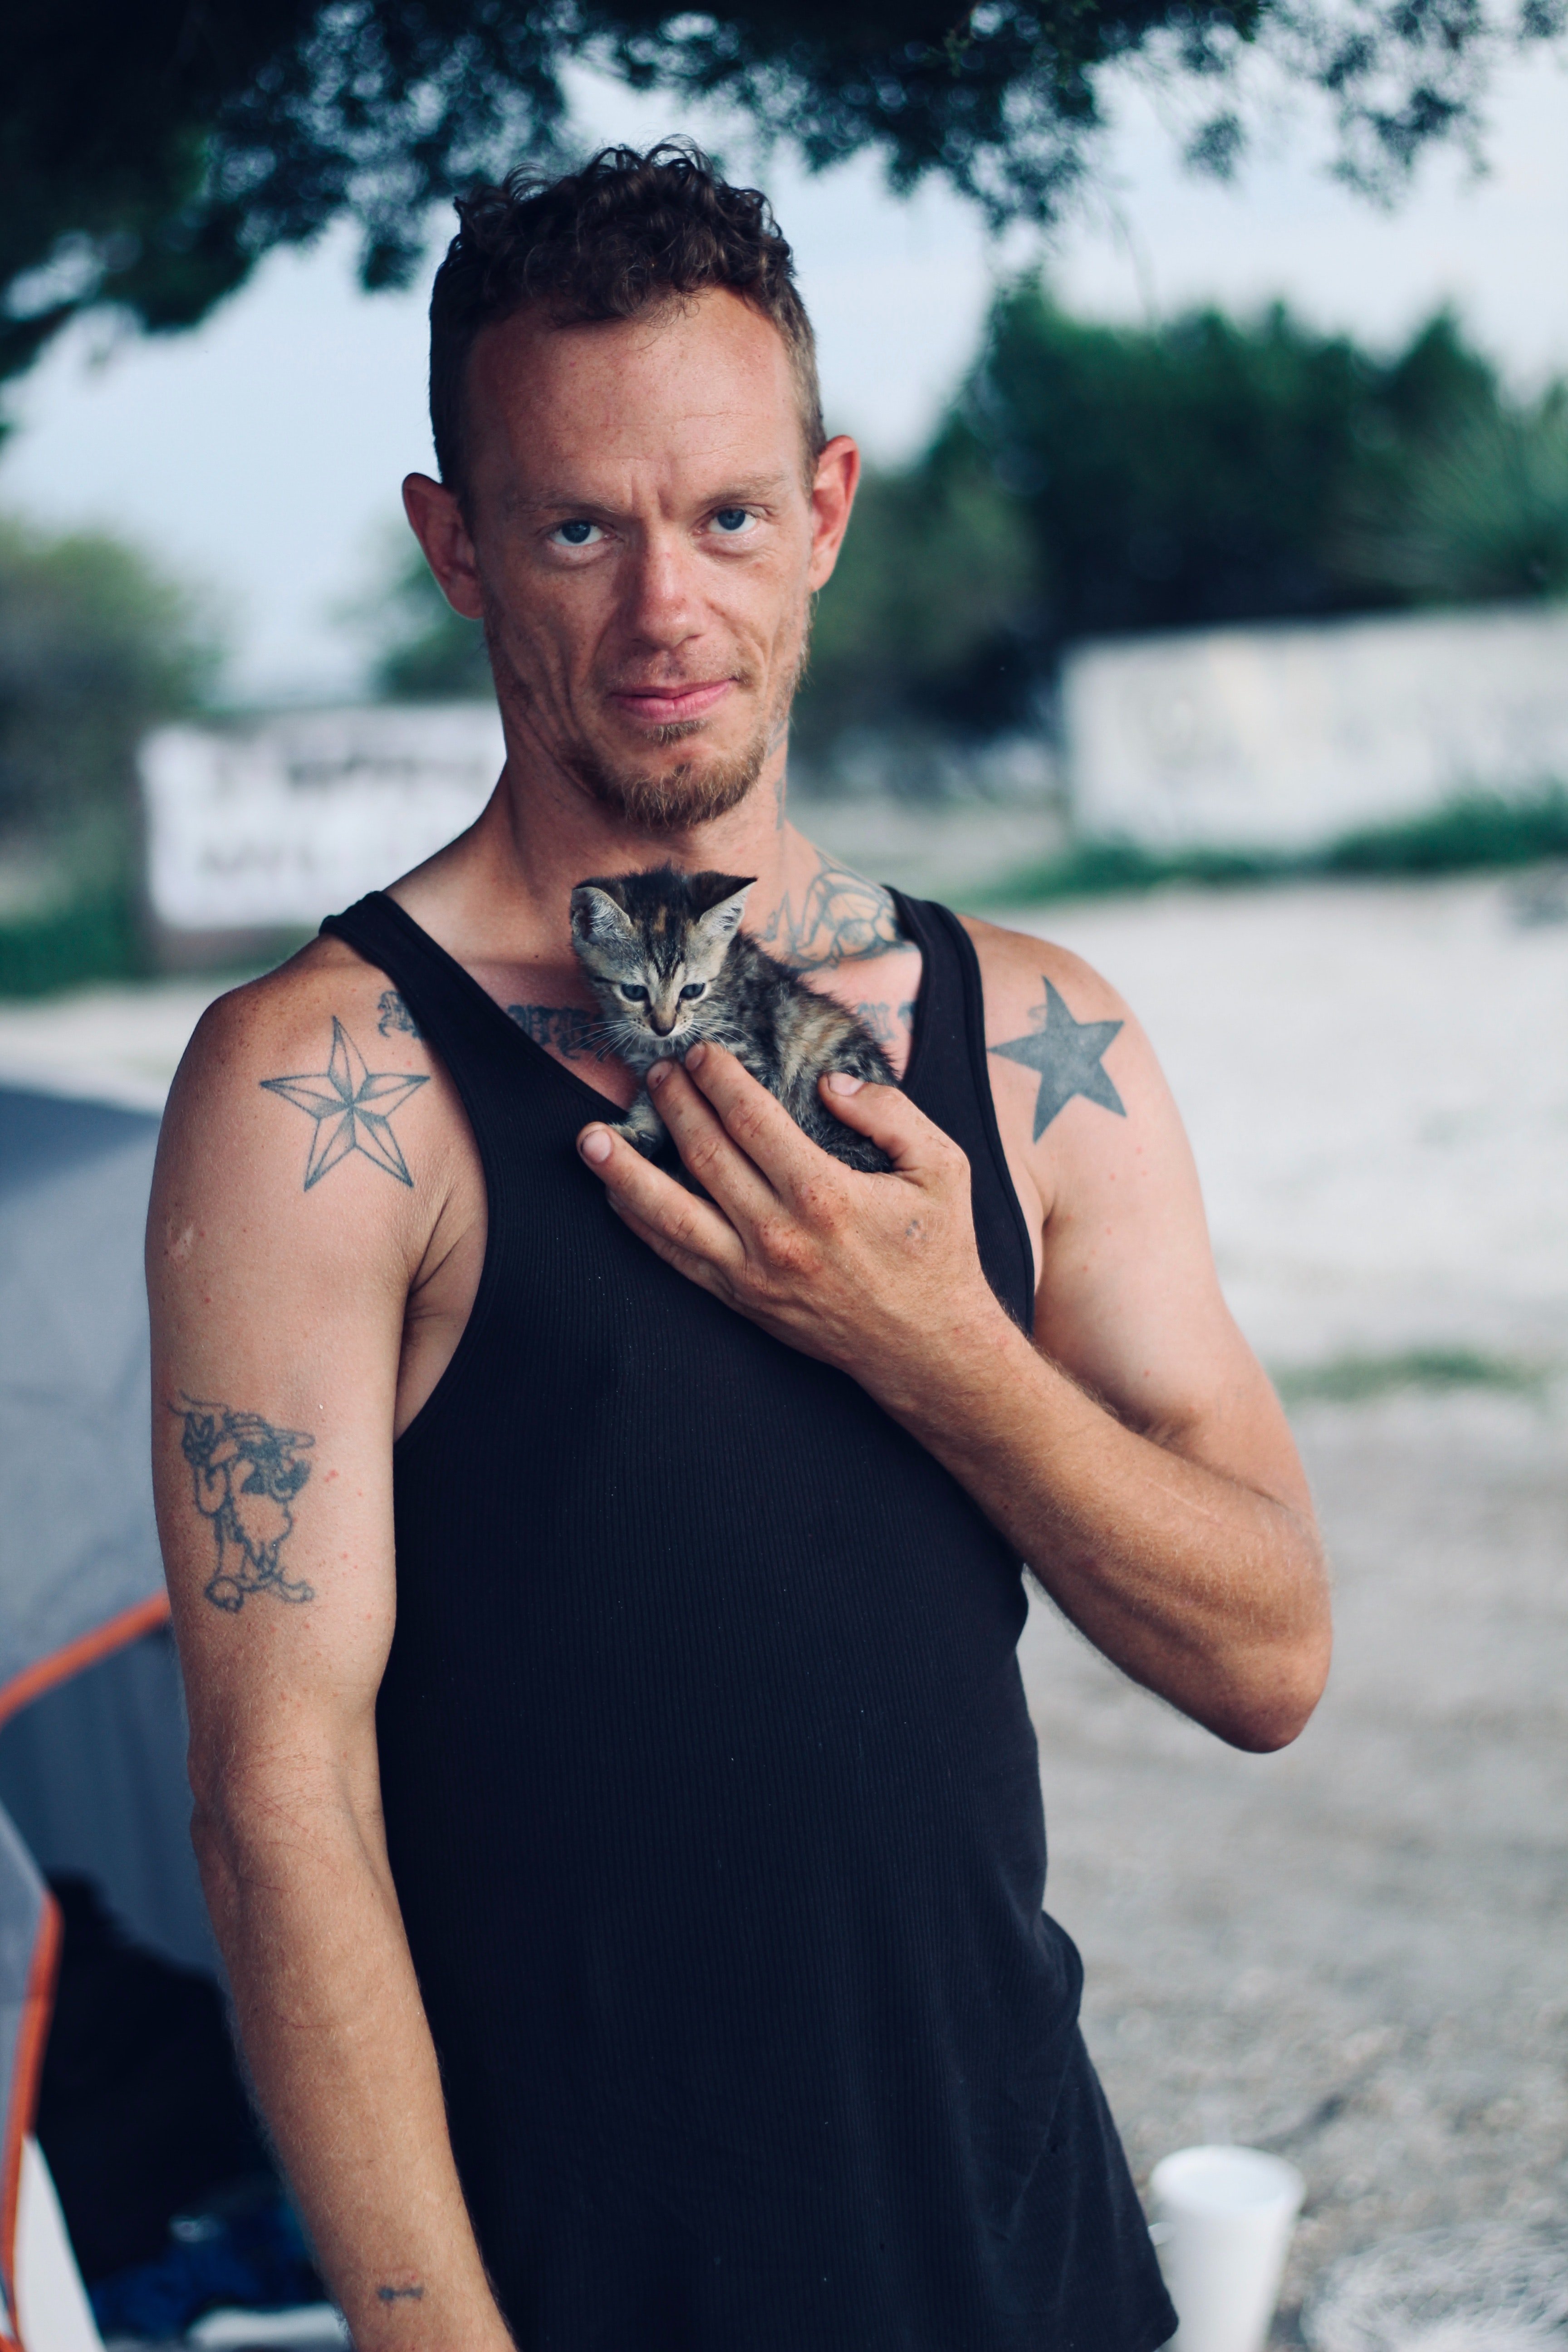 Pictured - A man wearing a black tank top with visible tattoos carrying a brown tabby cat | Source: Pexels 